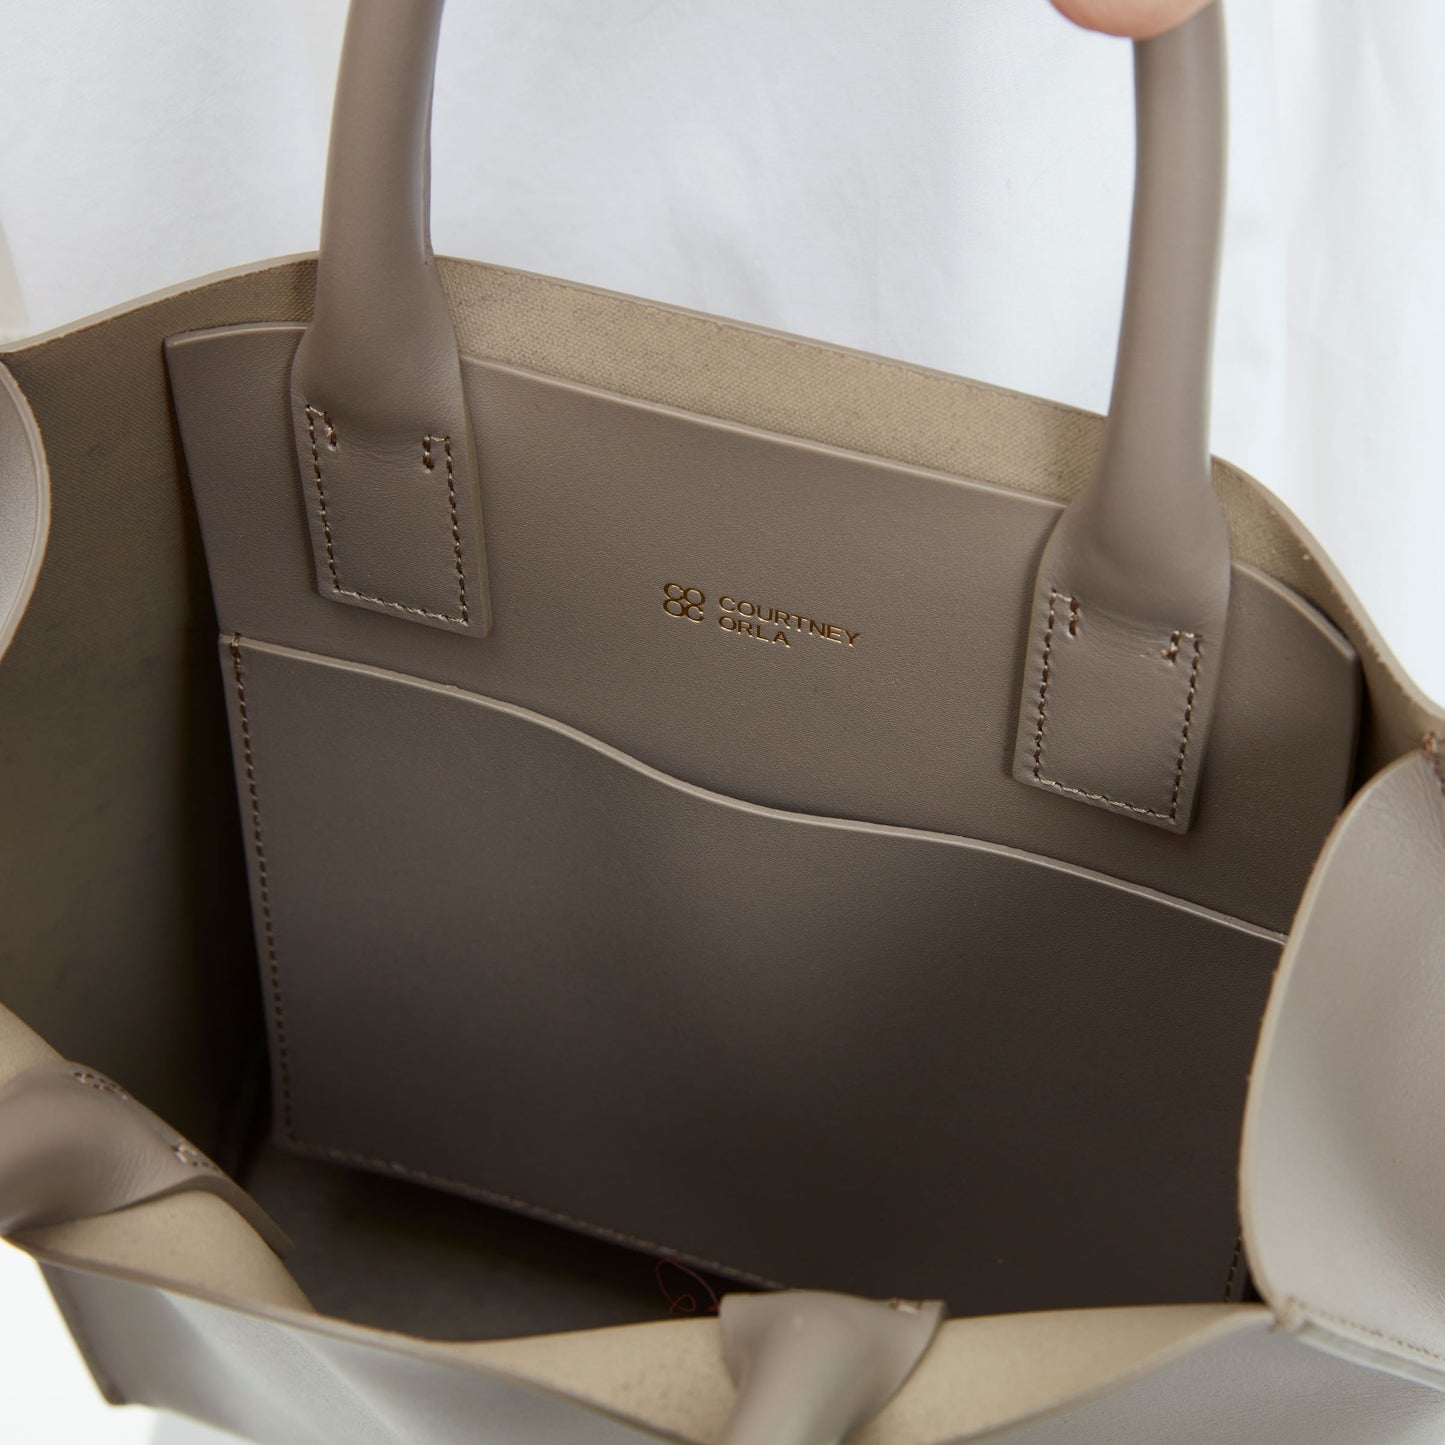 SLOPE TOTE S SMOOTH.L - TAUPE